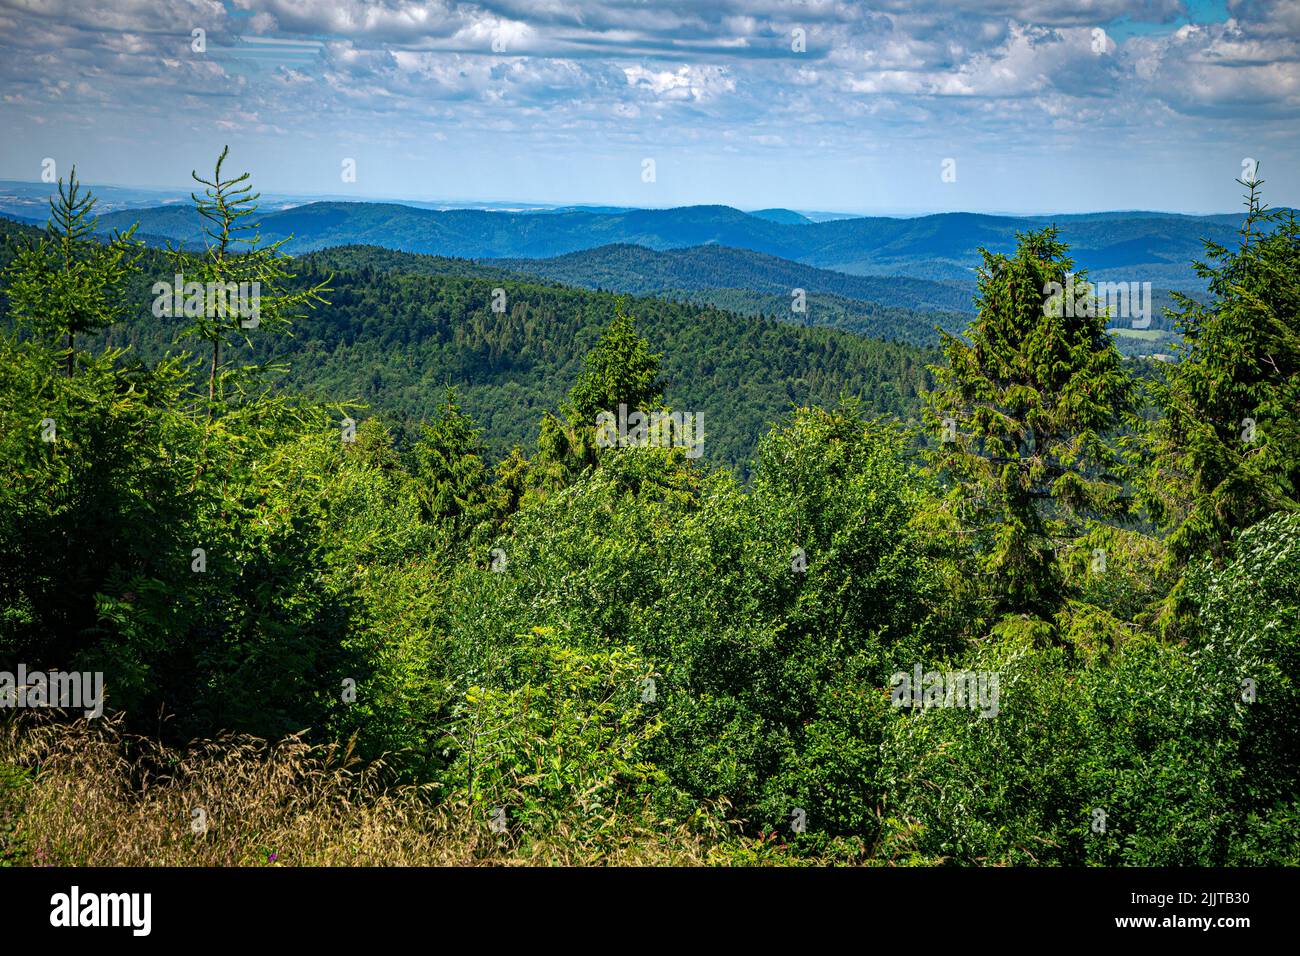 A picturesque panorama of the Low Beskids mountain range. Various shades of green of the trees against the blue overcast sky. Stock Photo